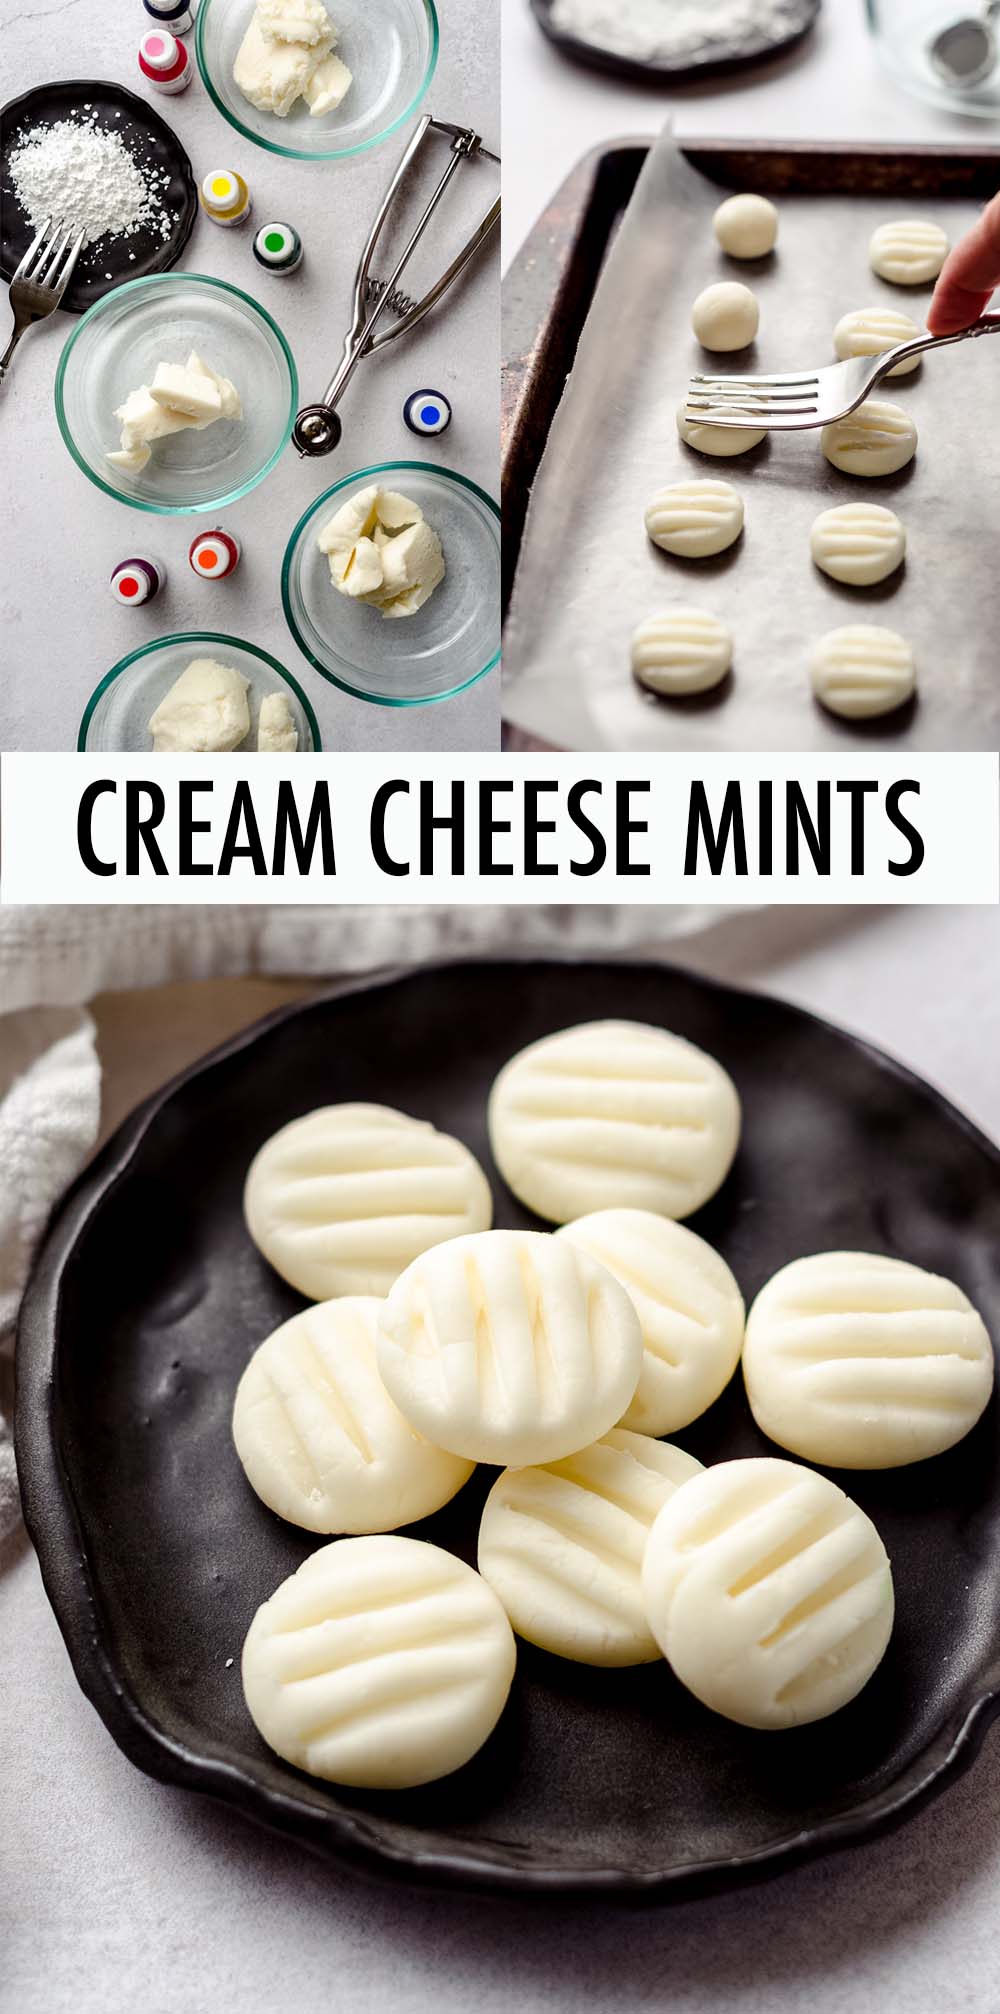 These easy cream cheese butter mints are a no bake treat perfect for baby and bridal showers, weddings, homemade gifts, and candy or cookie trays. Turn them any color you'd like to match your special occasion! via @frshaprilflours